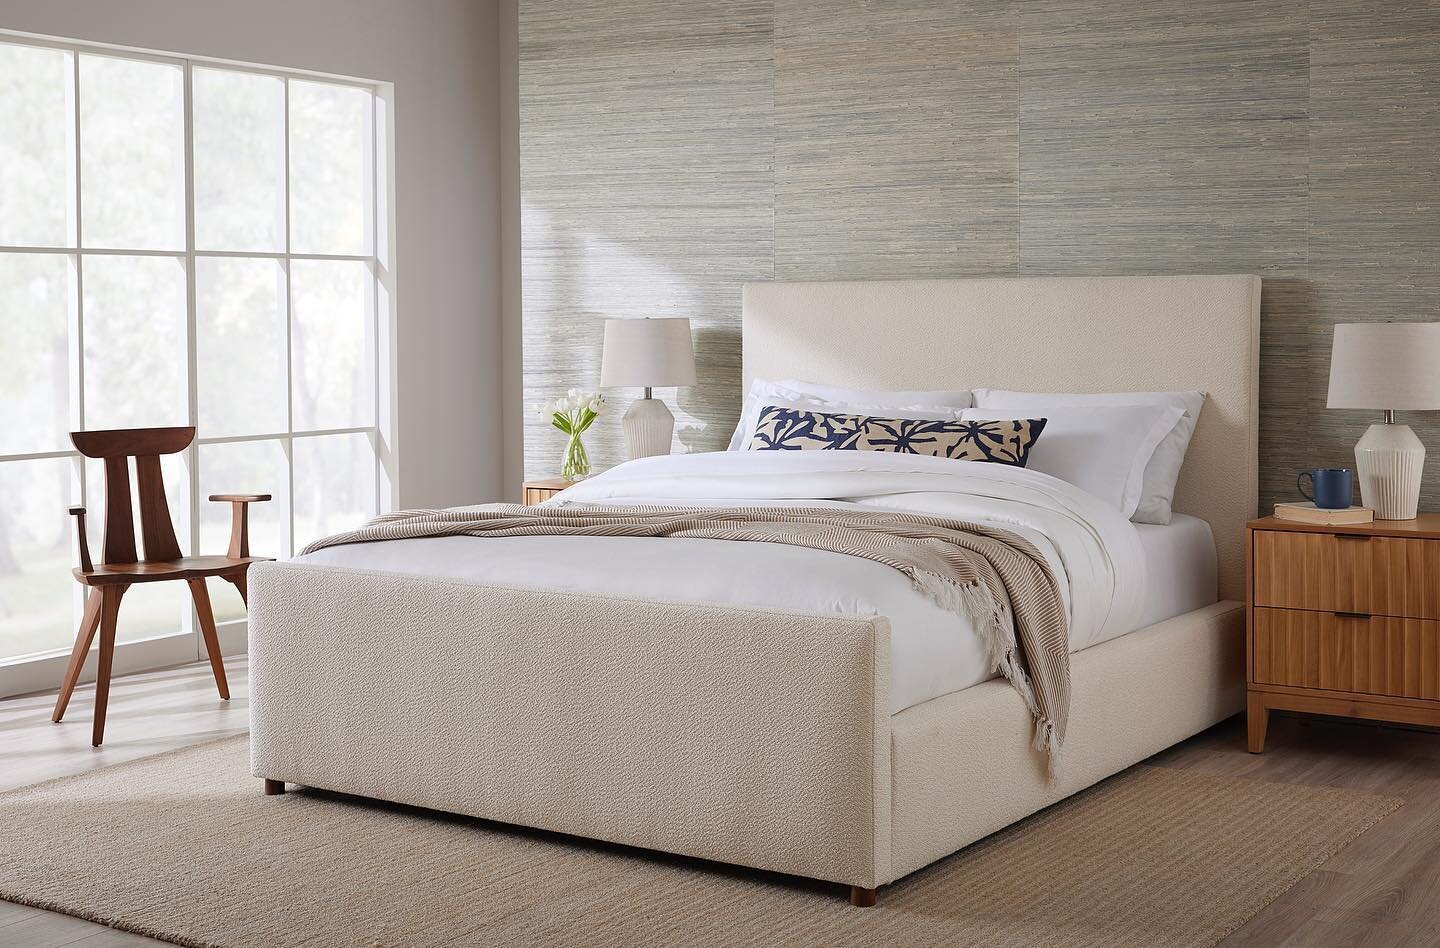 Hayes Bed // classic, tailored, and streamlined ✨